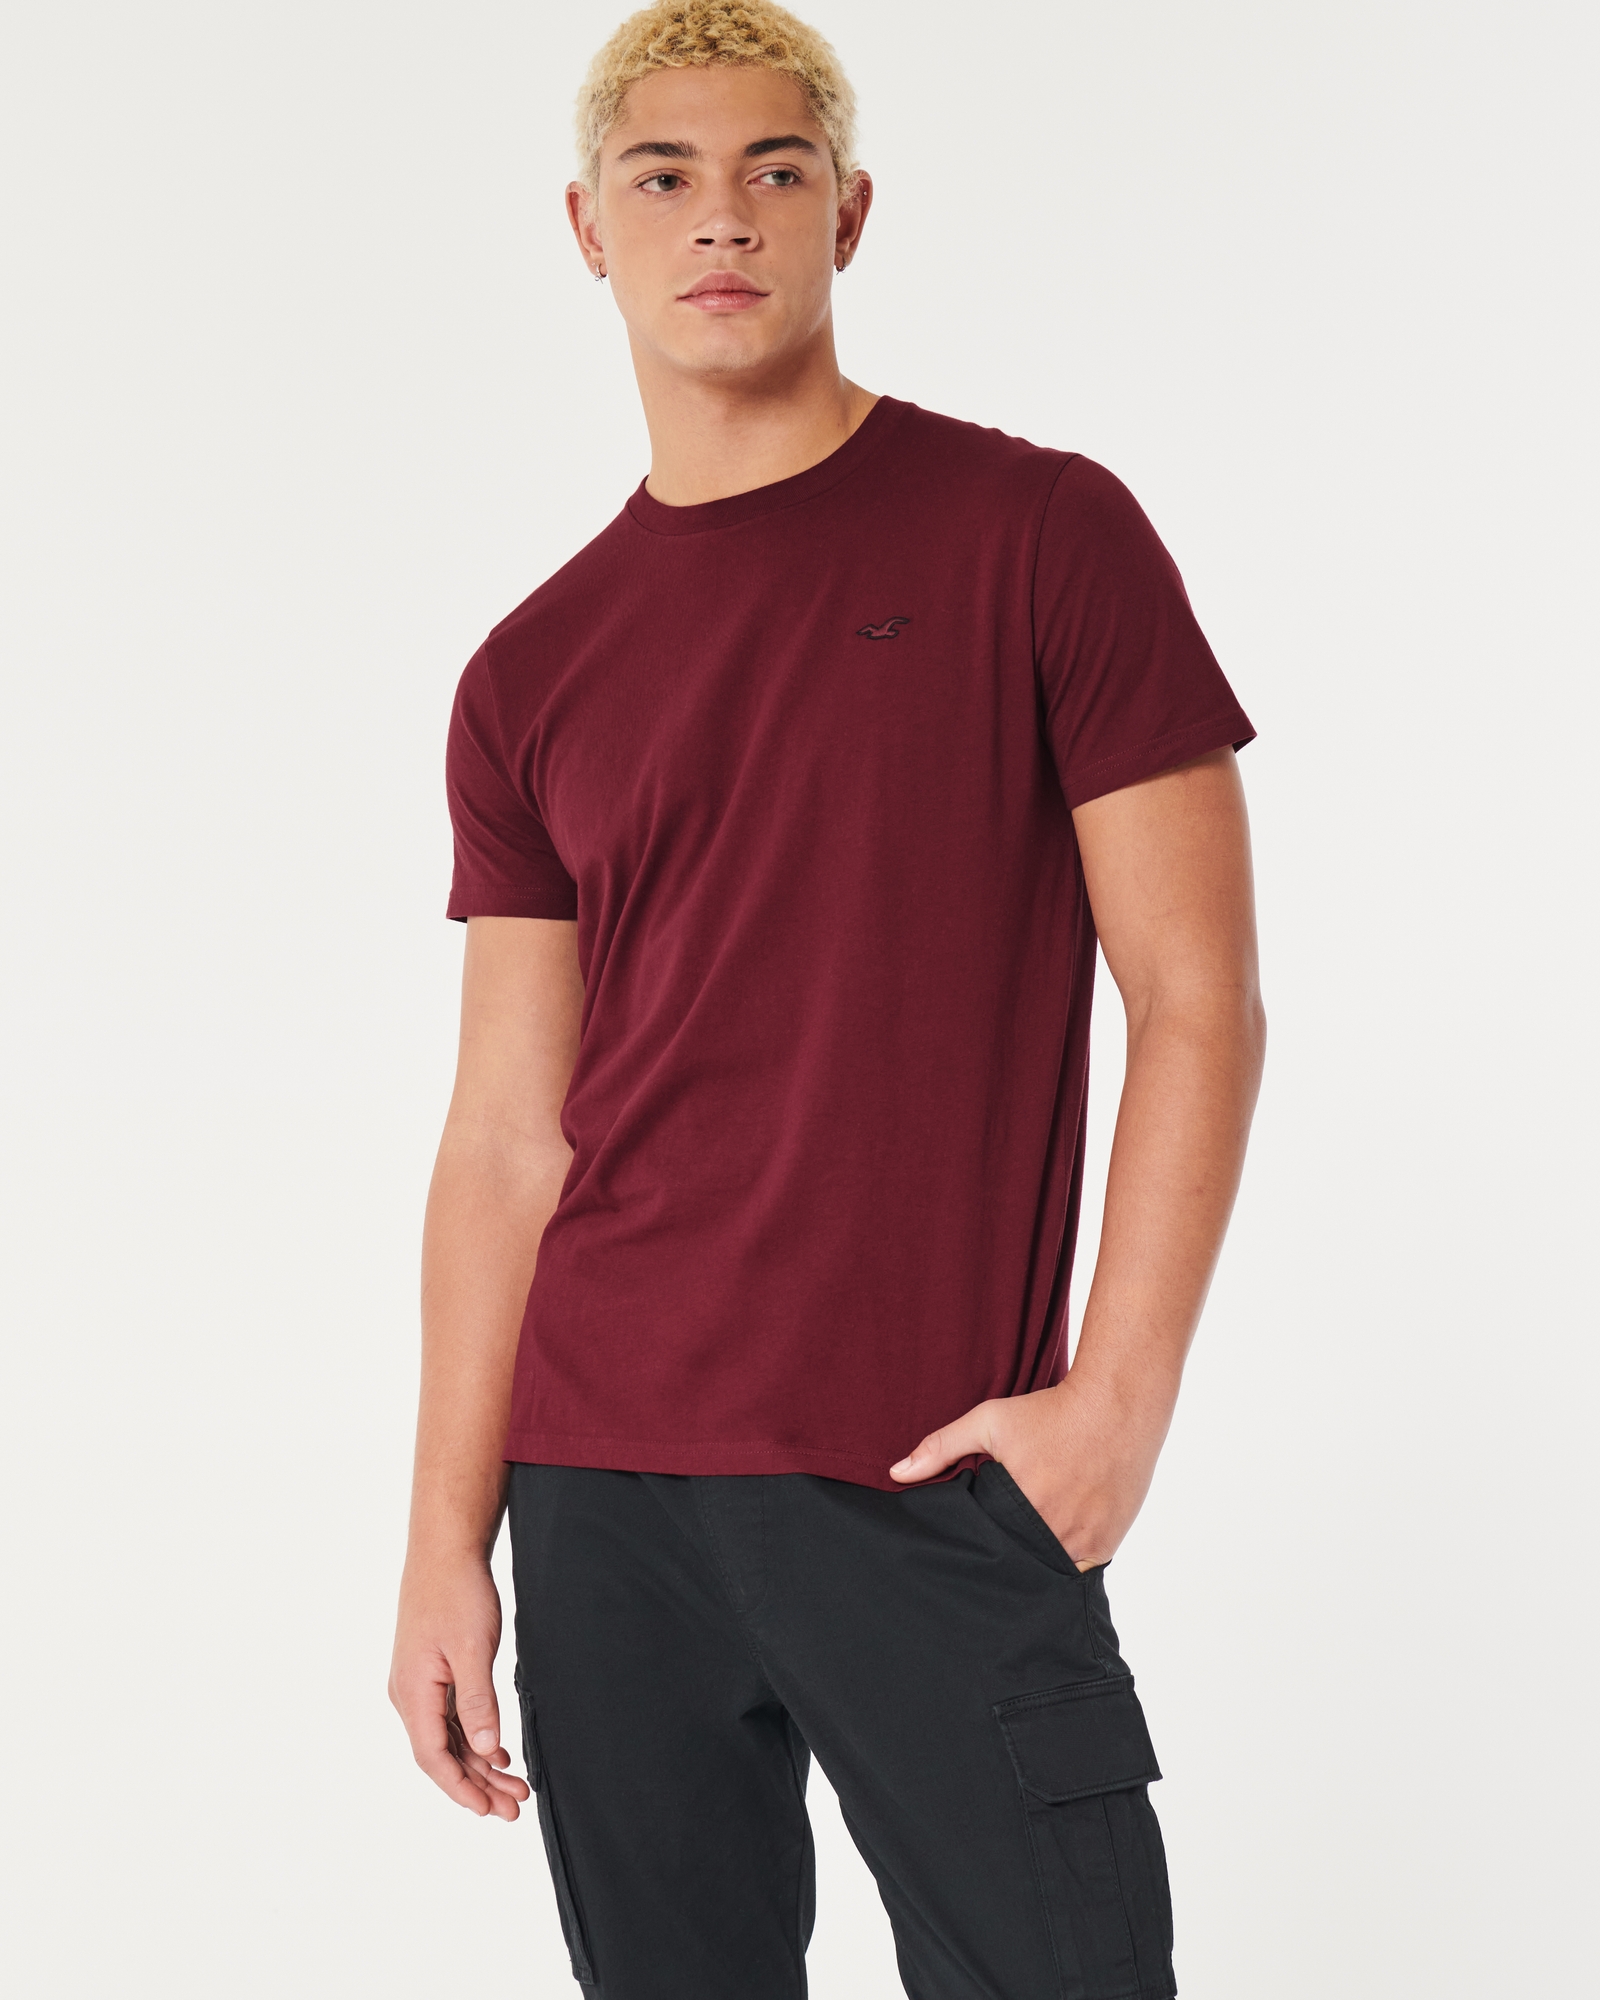 Hollister California Men's Muscle Fit Logo Icon Crew Neck T-Shirt  (Single/Packs) HOM-M (Large, 1483-110) at  Men's Clothing store